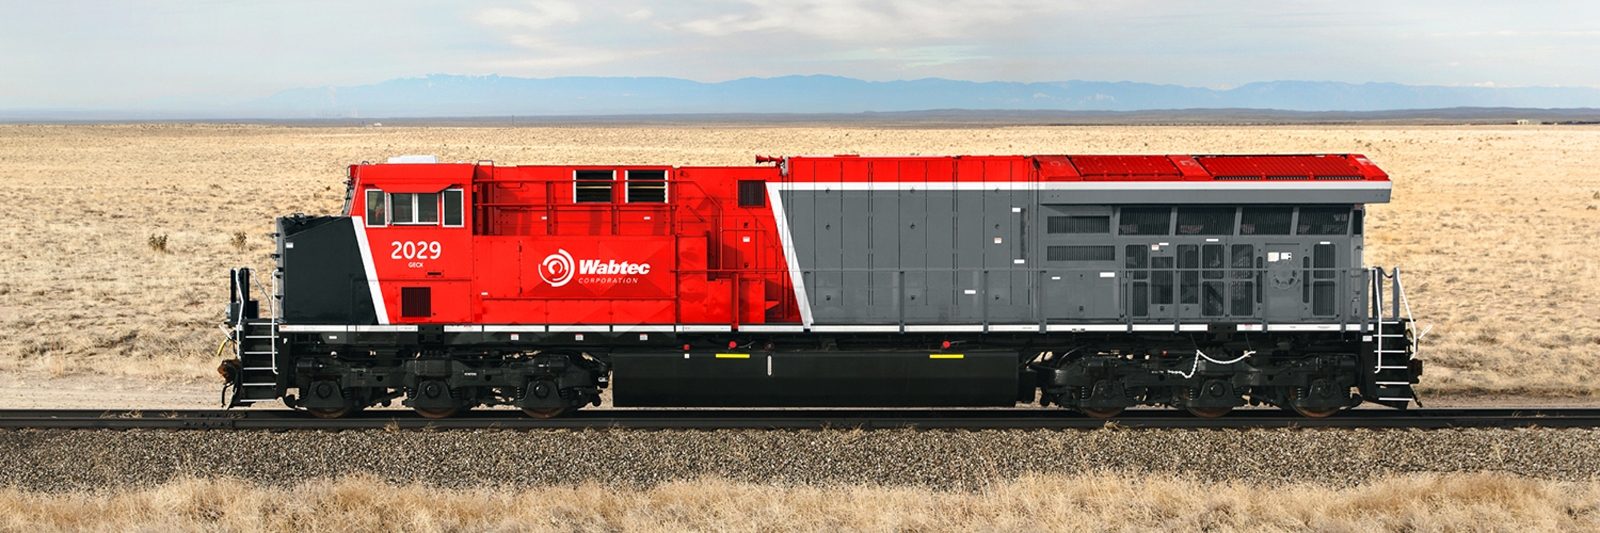 Trains of Thought │ Wabtec Corporation